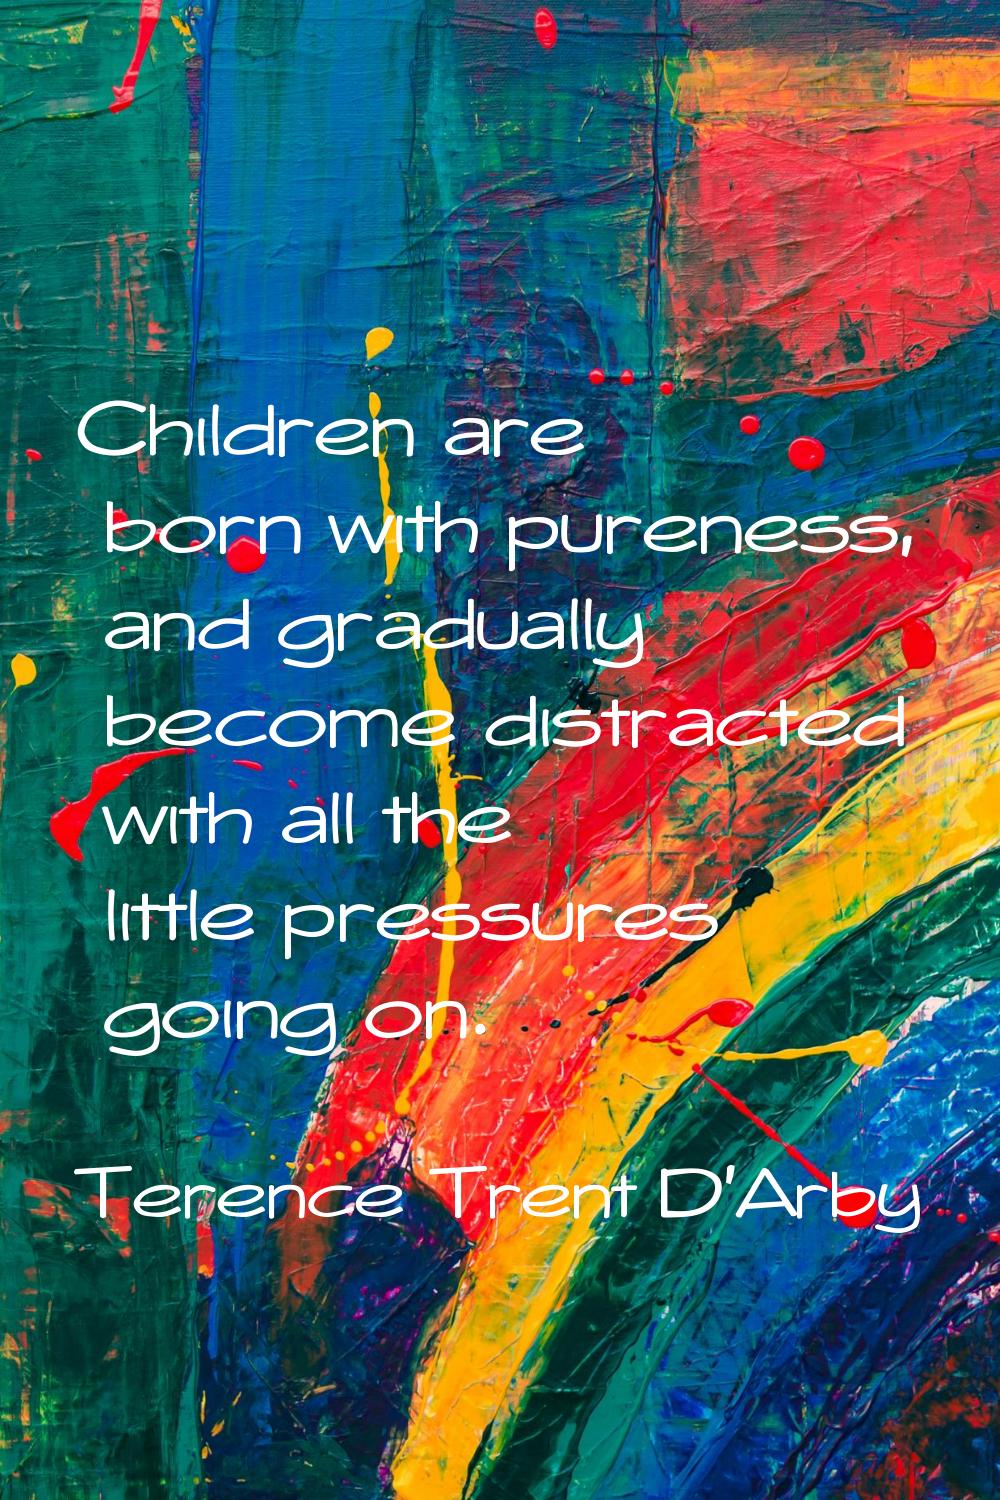 Children are born with pureness, and gradually become distracted with all the little pressures goin